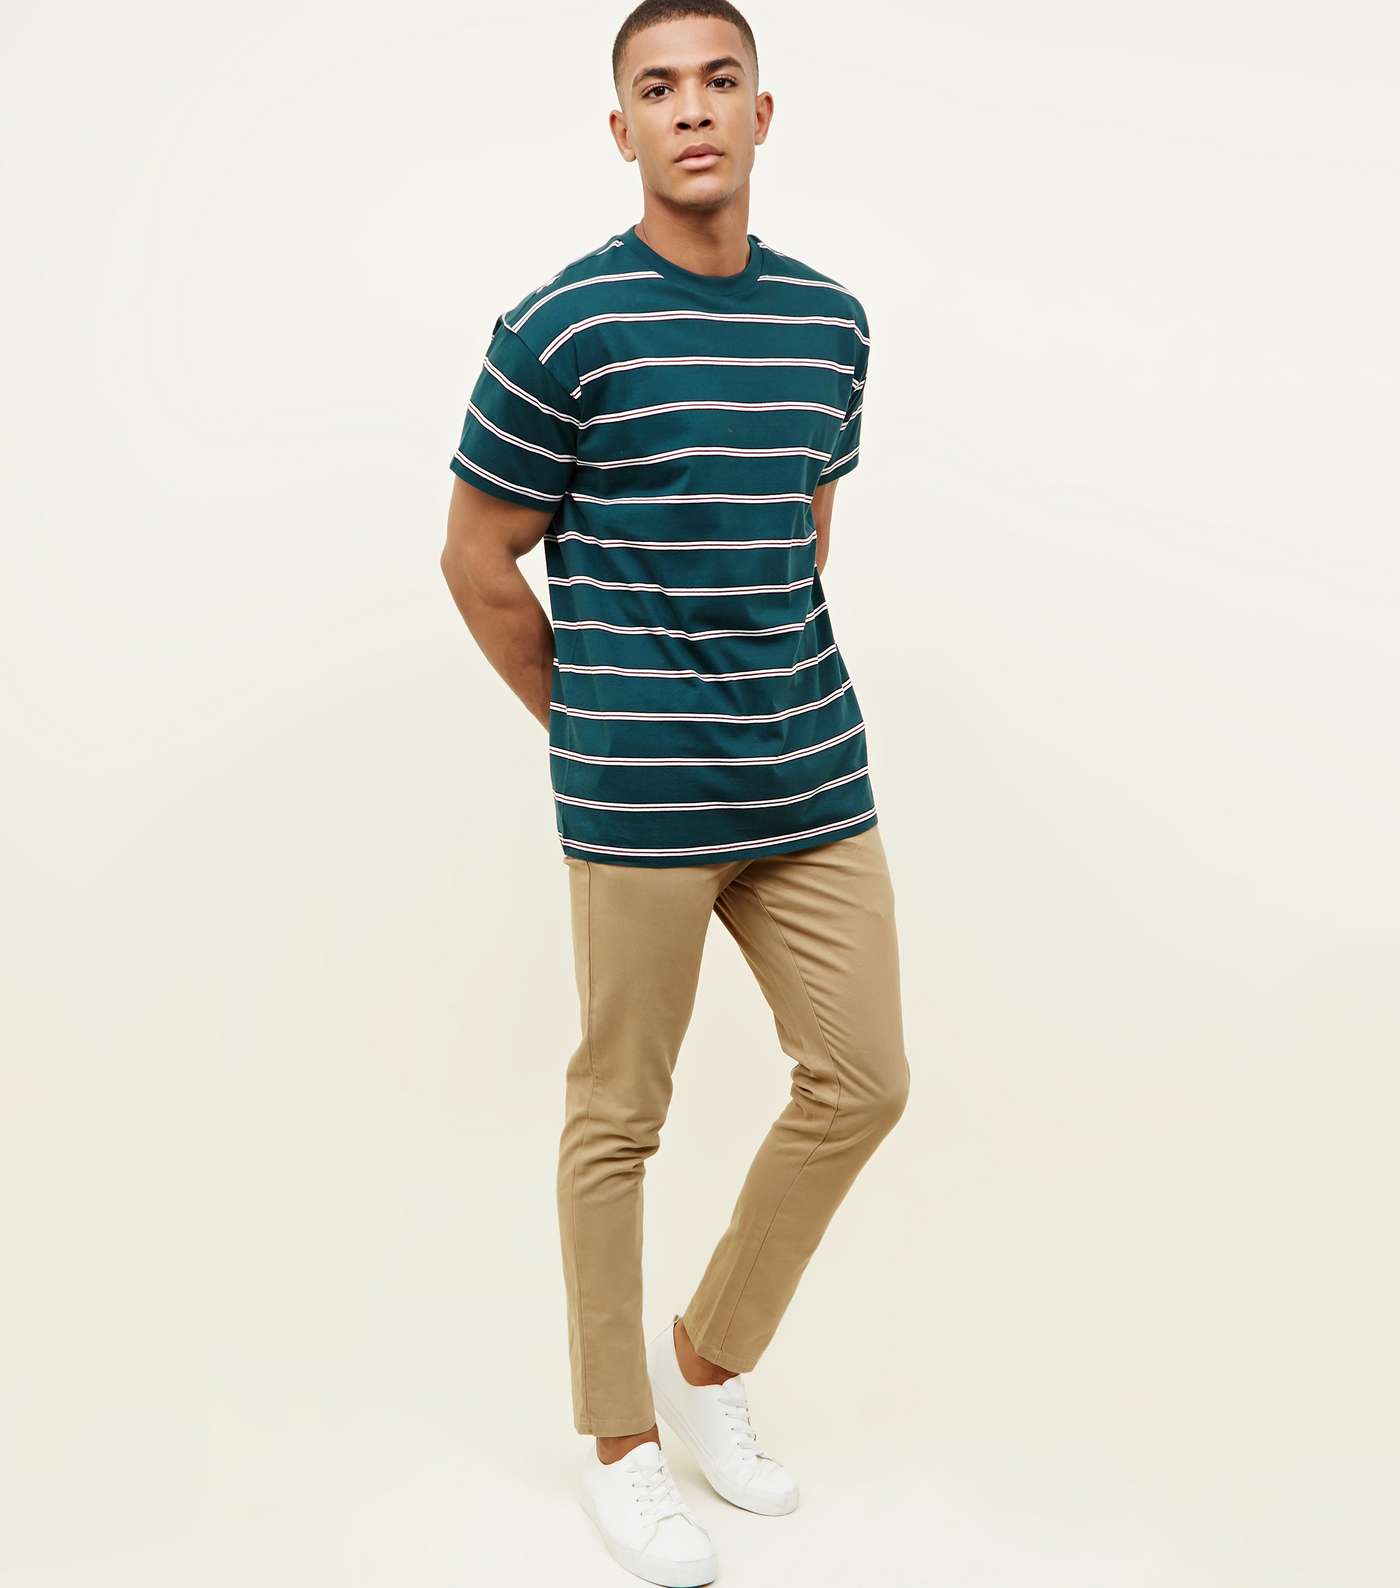 Teal Double Stripe T-Shirt Image 2